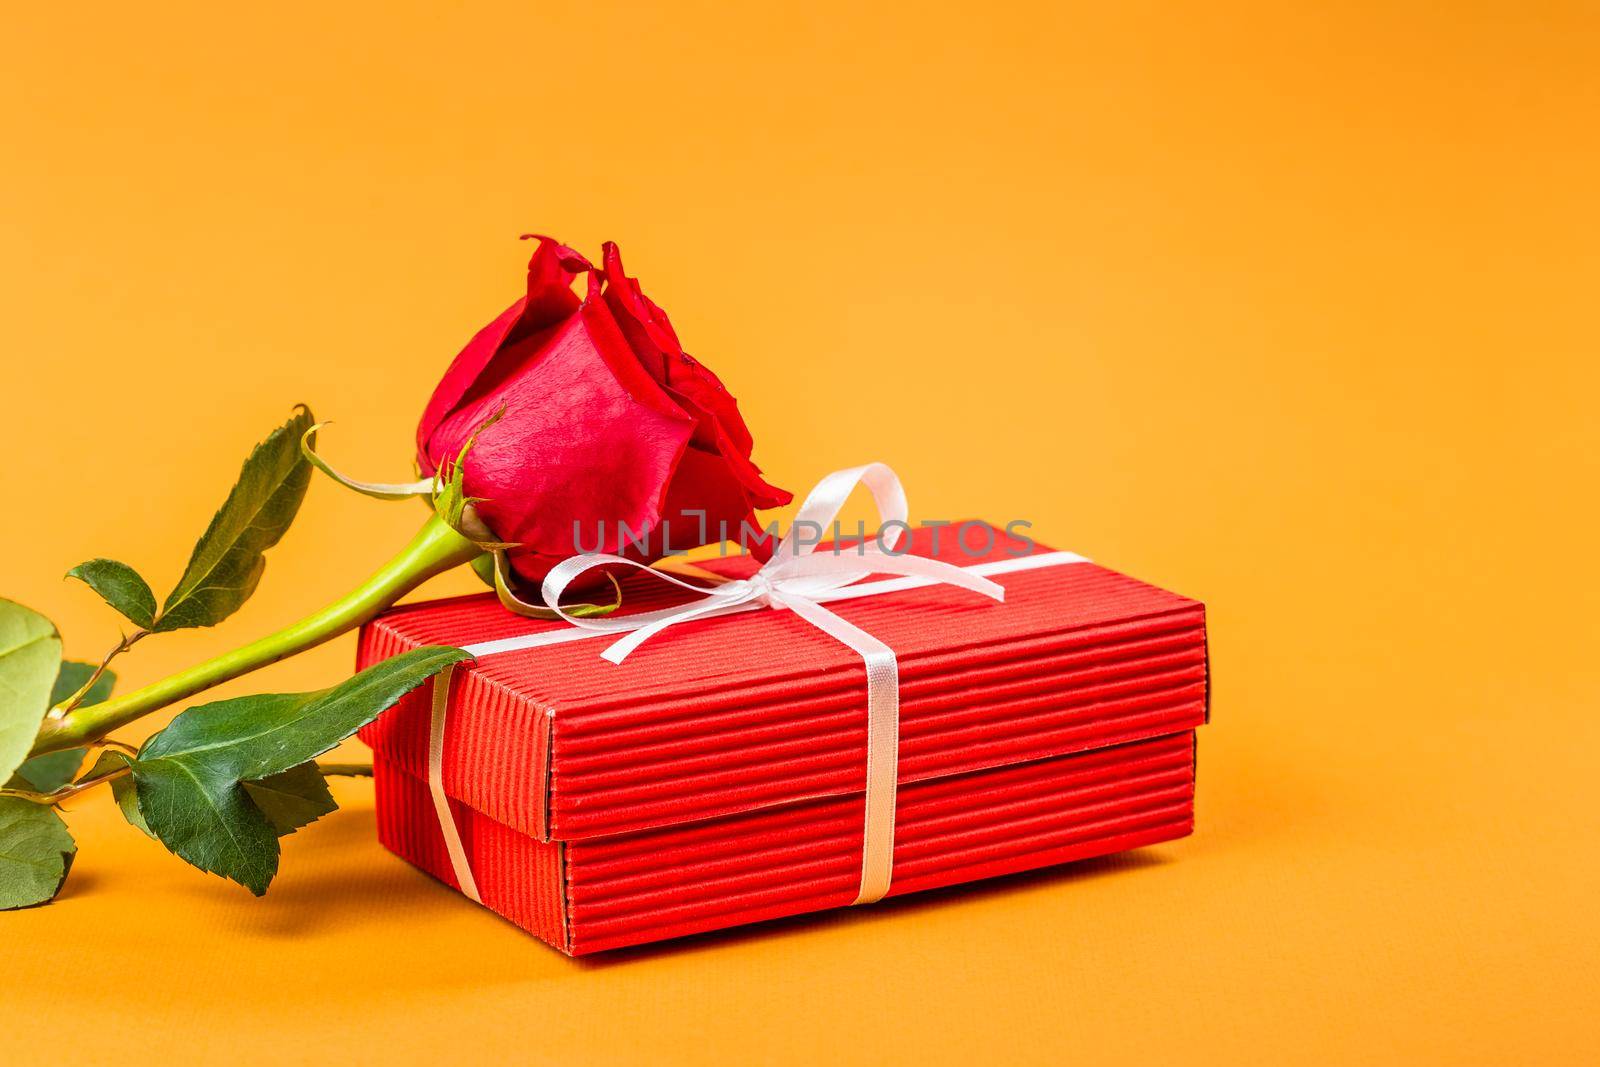 Red gift box with a white ribbon and white rose flower over vibrant orange background. Valentines Day or Birthday gift concept 